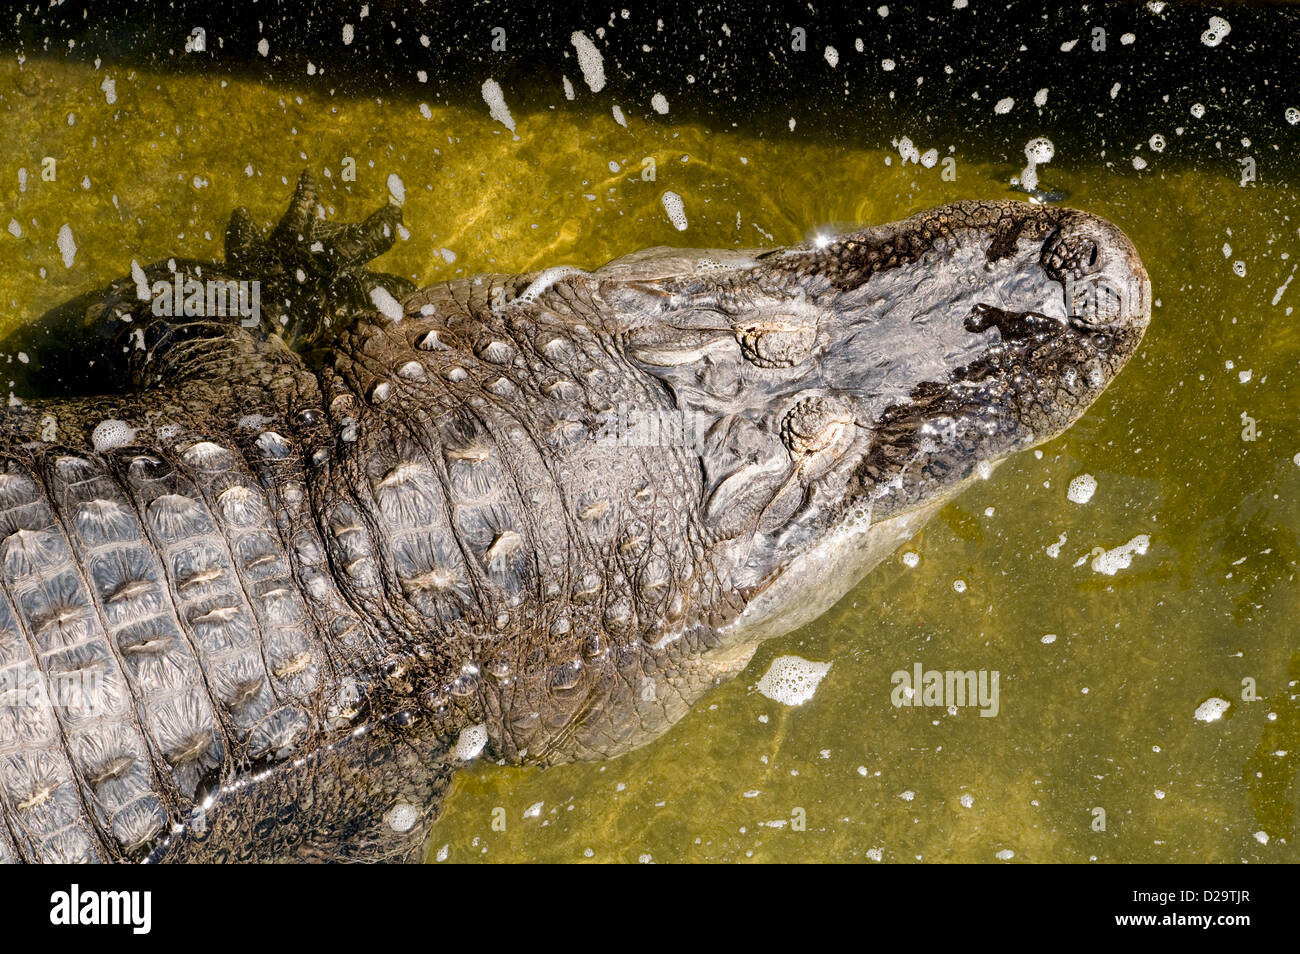 Alligator, New York, Pittsburgh, Pittsburgh Zoo Banque D'Images